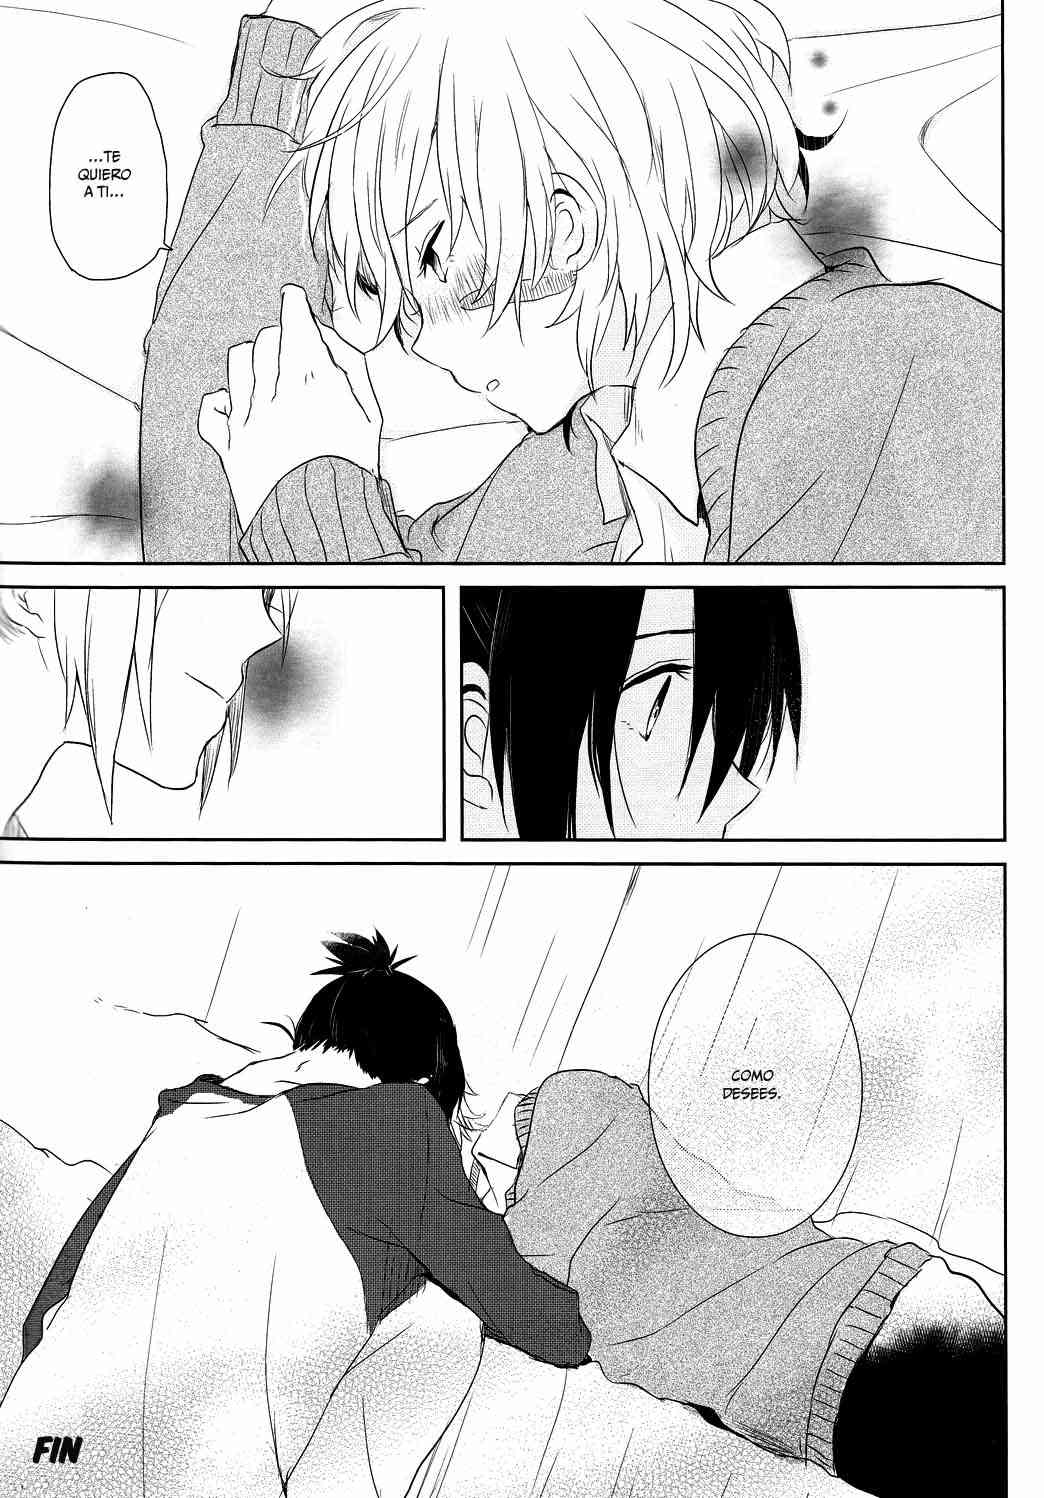 Doujinshi No.6 Determine Your Desire, then Do It Chapter-1 - 27